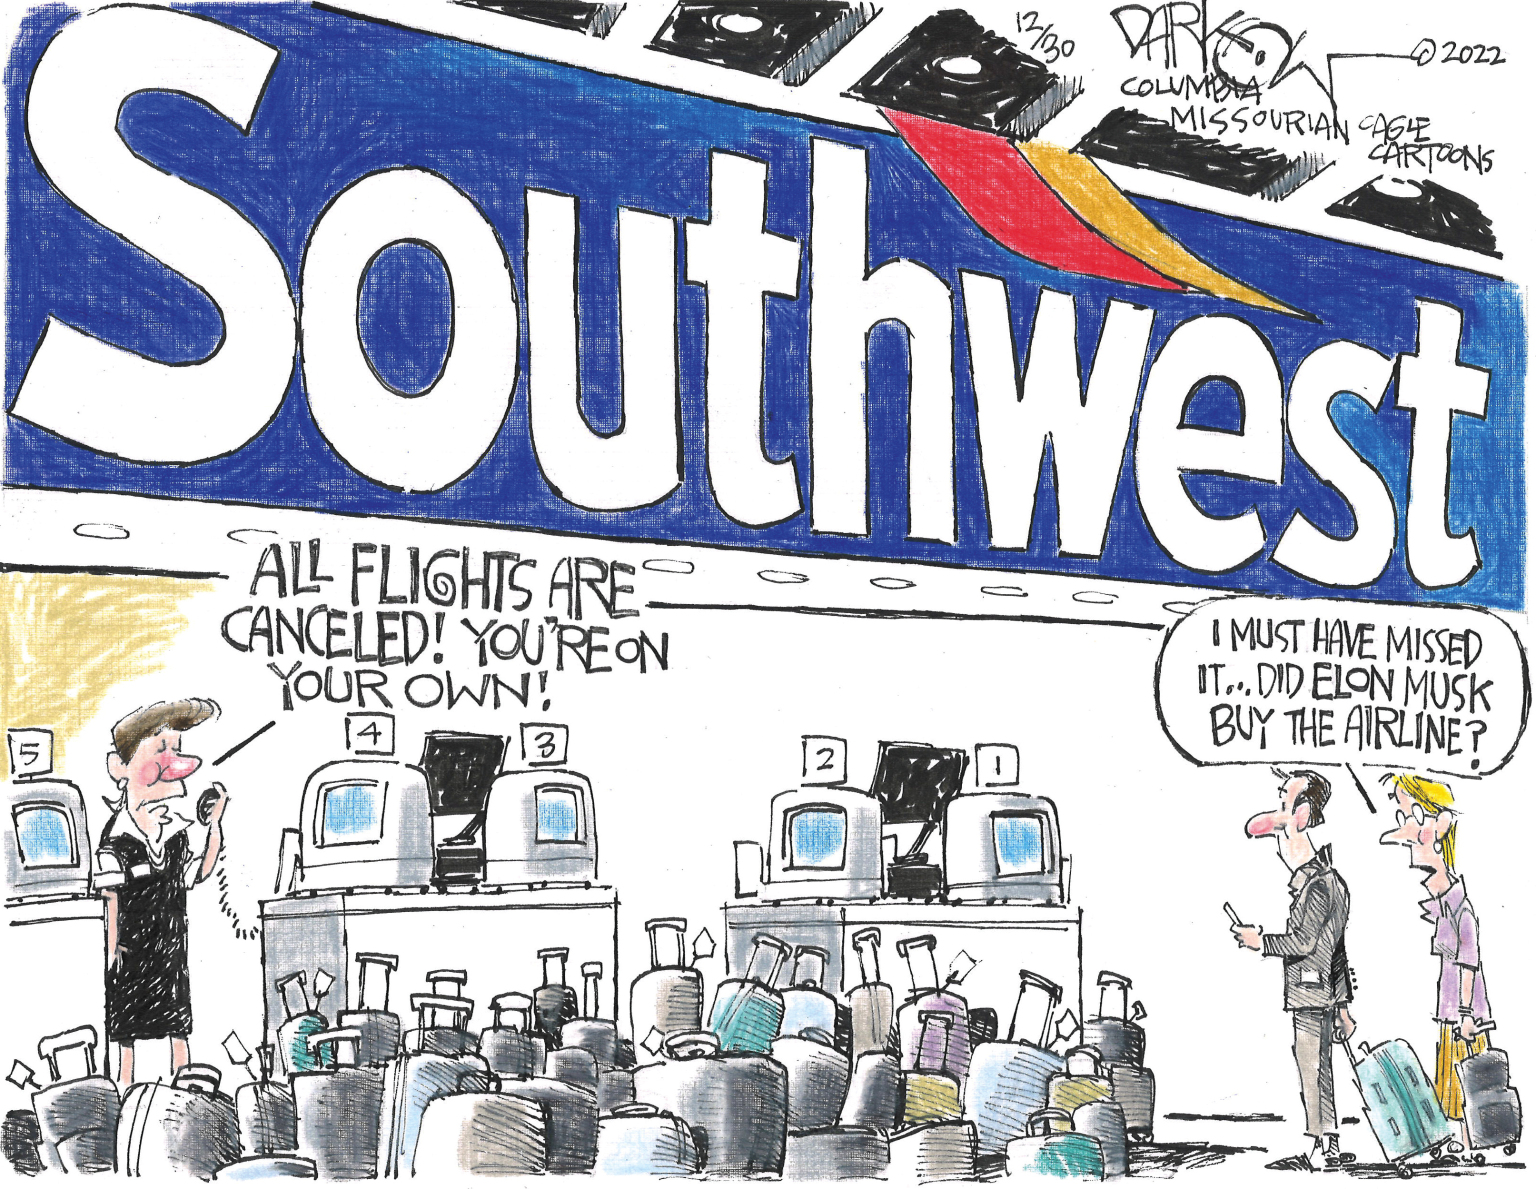 Southworst Airlines - By John Darkow